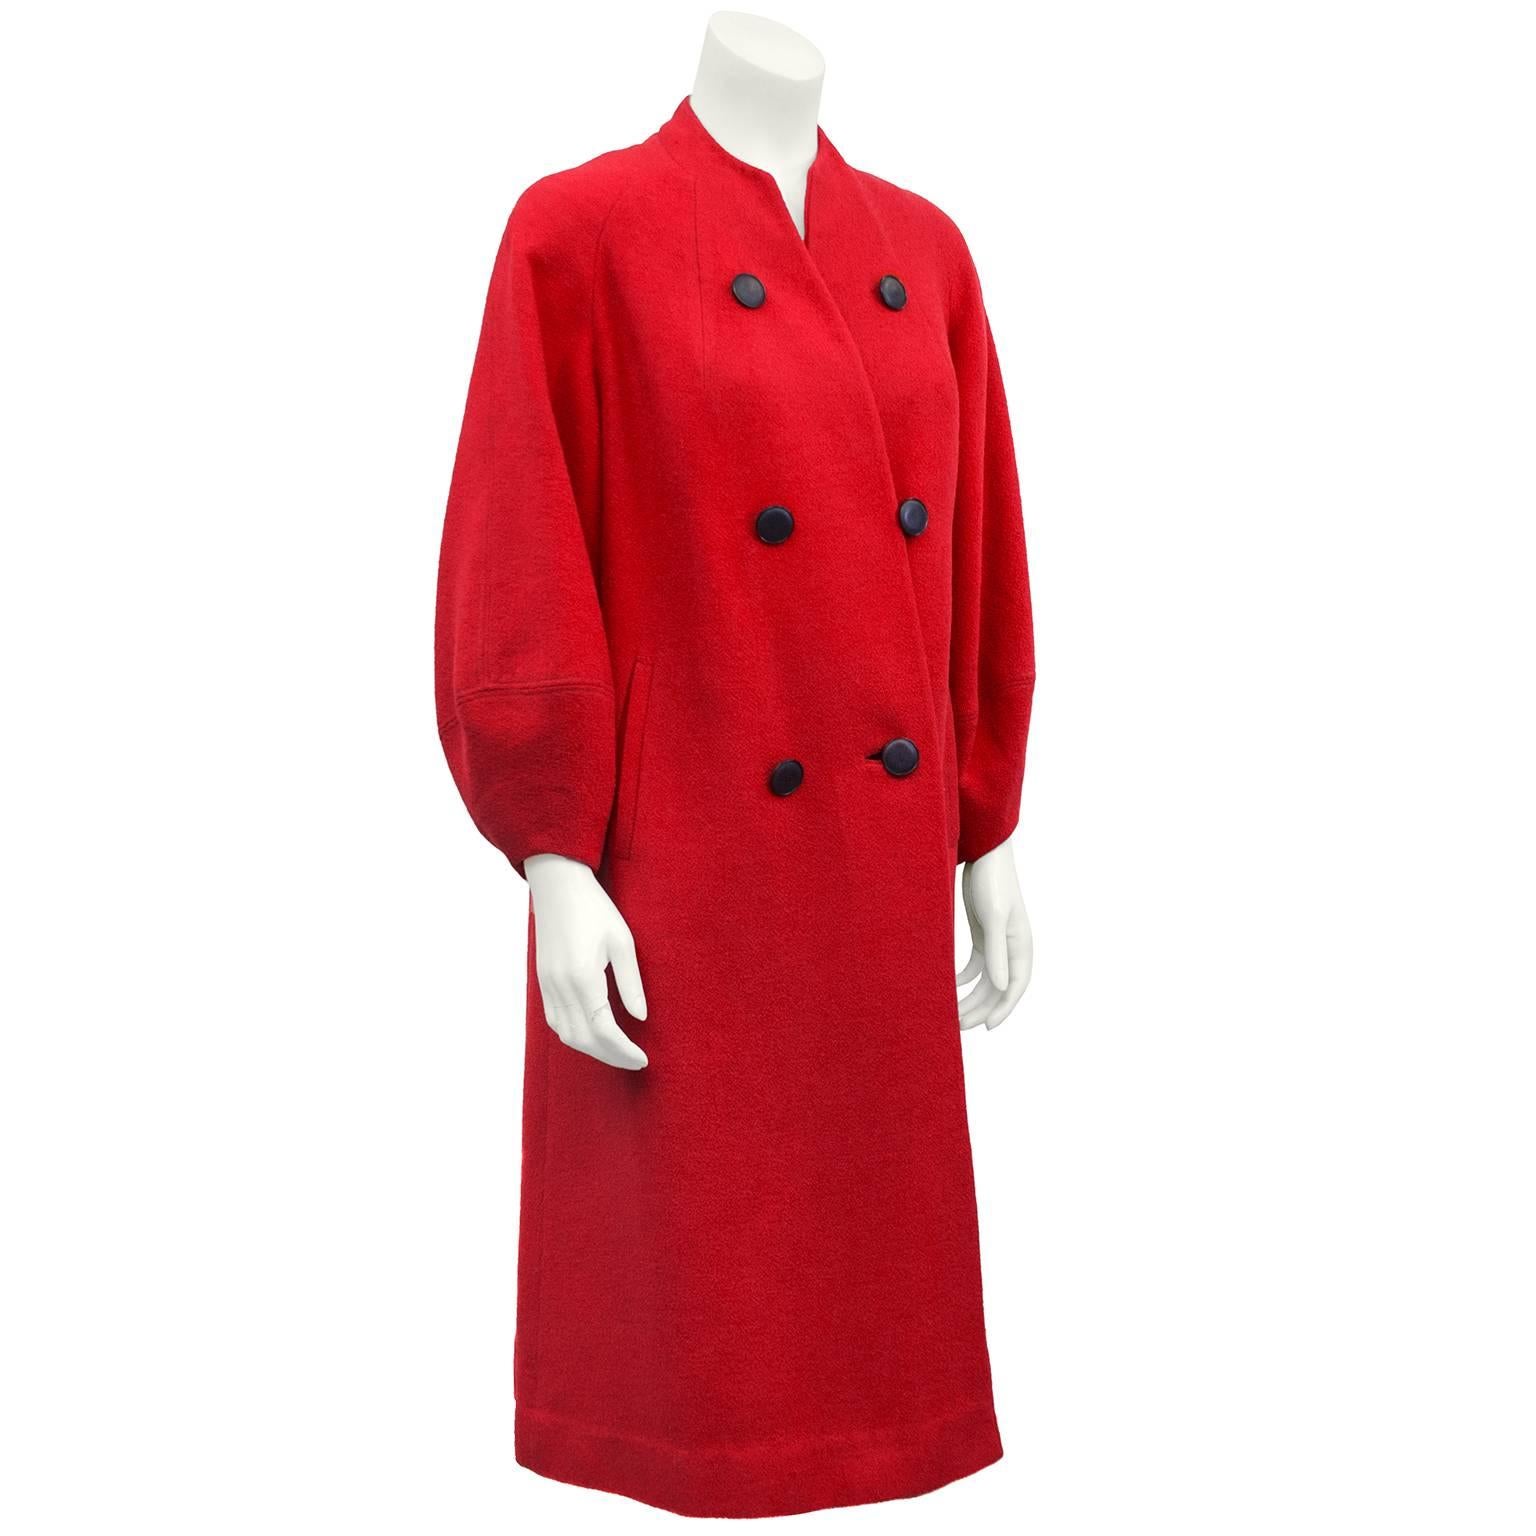 Great 1950s red faux double breasted wool coat cut diagonally, the first button does not do up, second button has a button loop on the seam and the bottom button has a button hole. Collarless, with very small v neck and balloon sleeves. In excellent